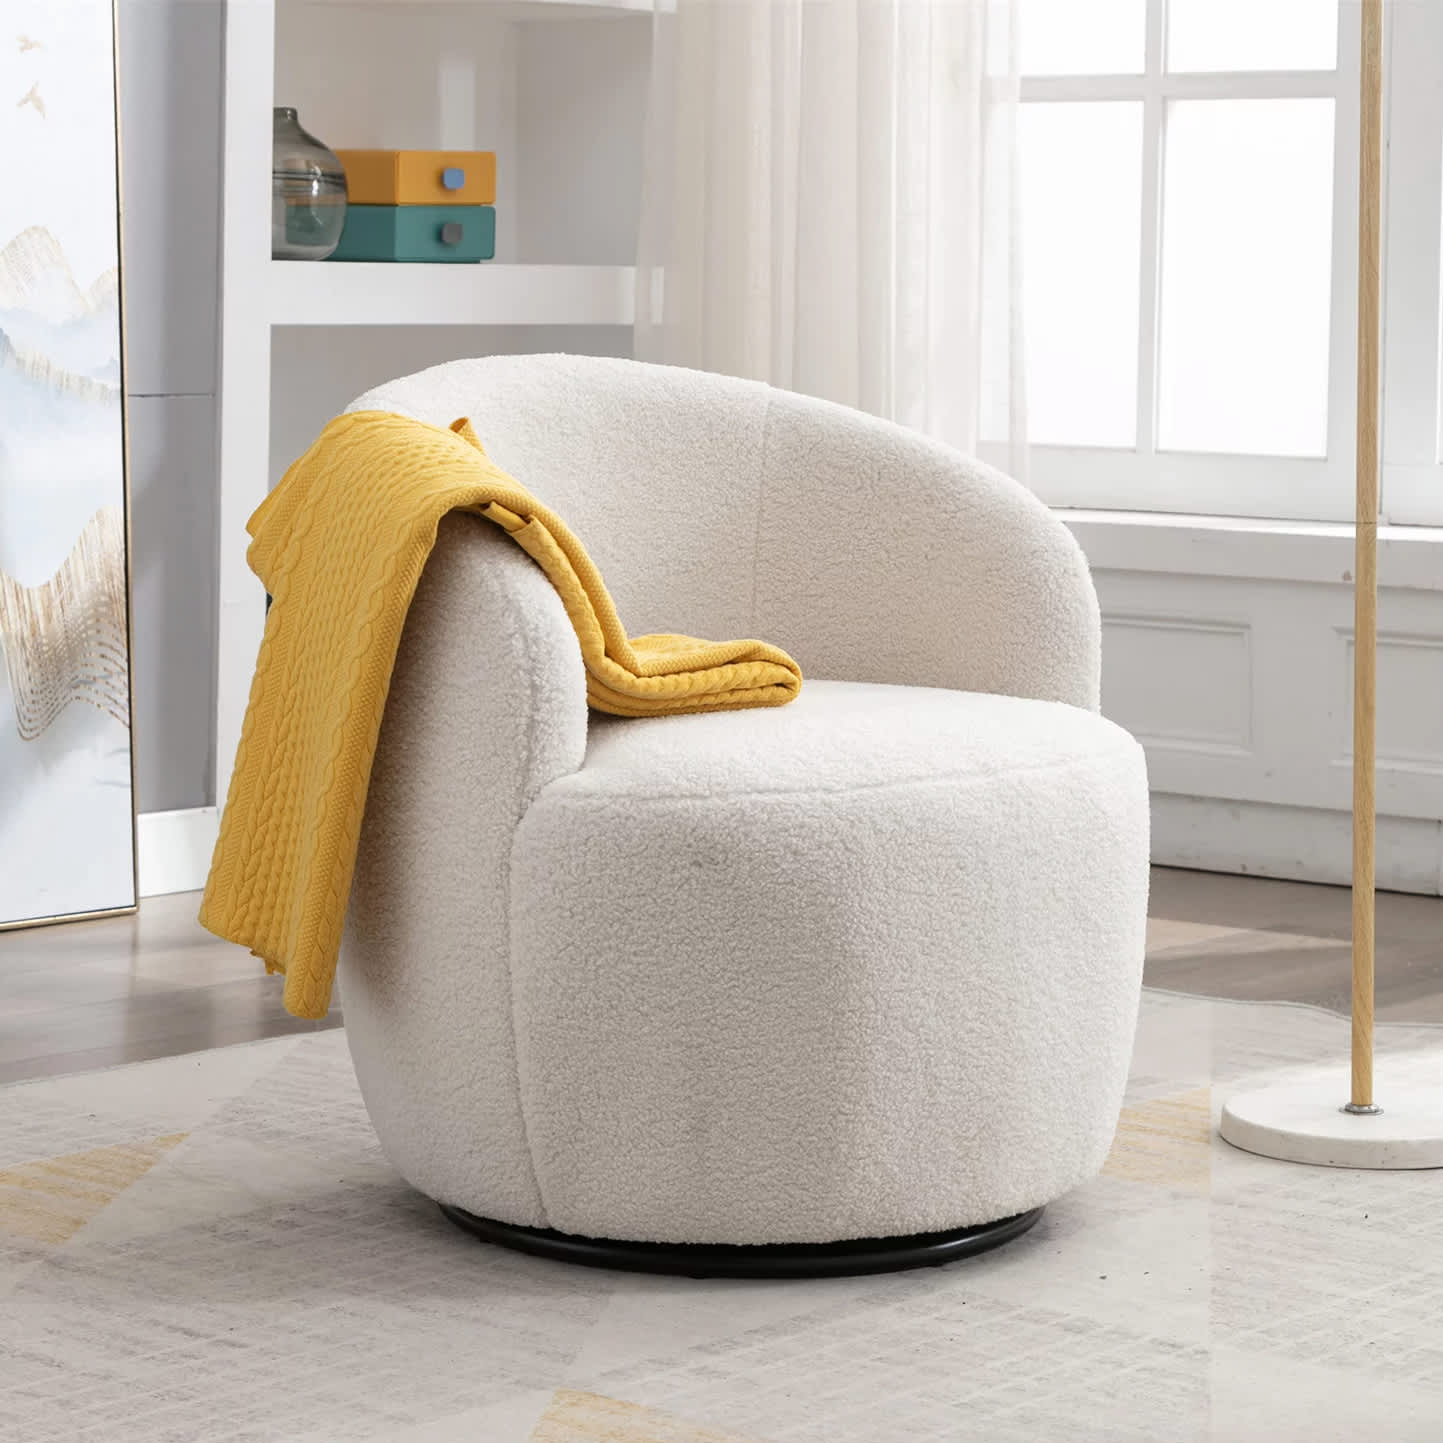 http://cdn.apartmenttherapy.info/image/upload/v1687366939/commerce/product-roundups/2023/2023-06-comfortable-chairs-small-spaces/arctic-scorpion-swivel-barrel-chair.jpg